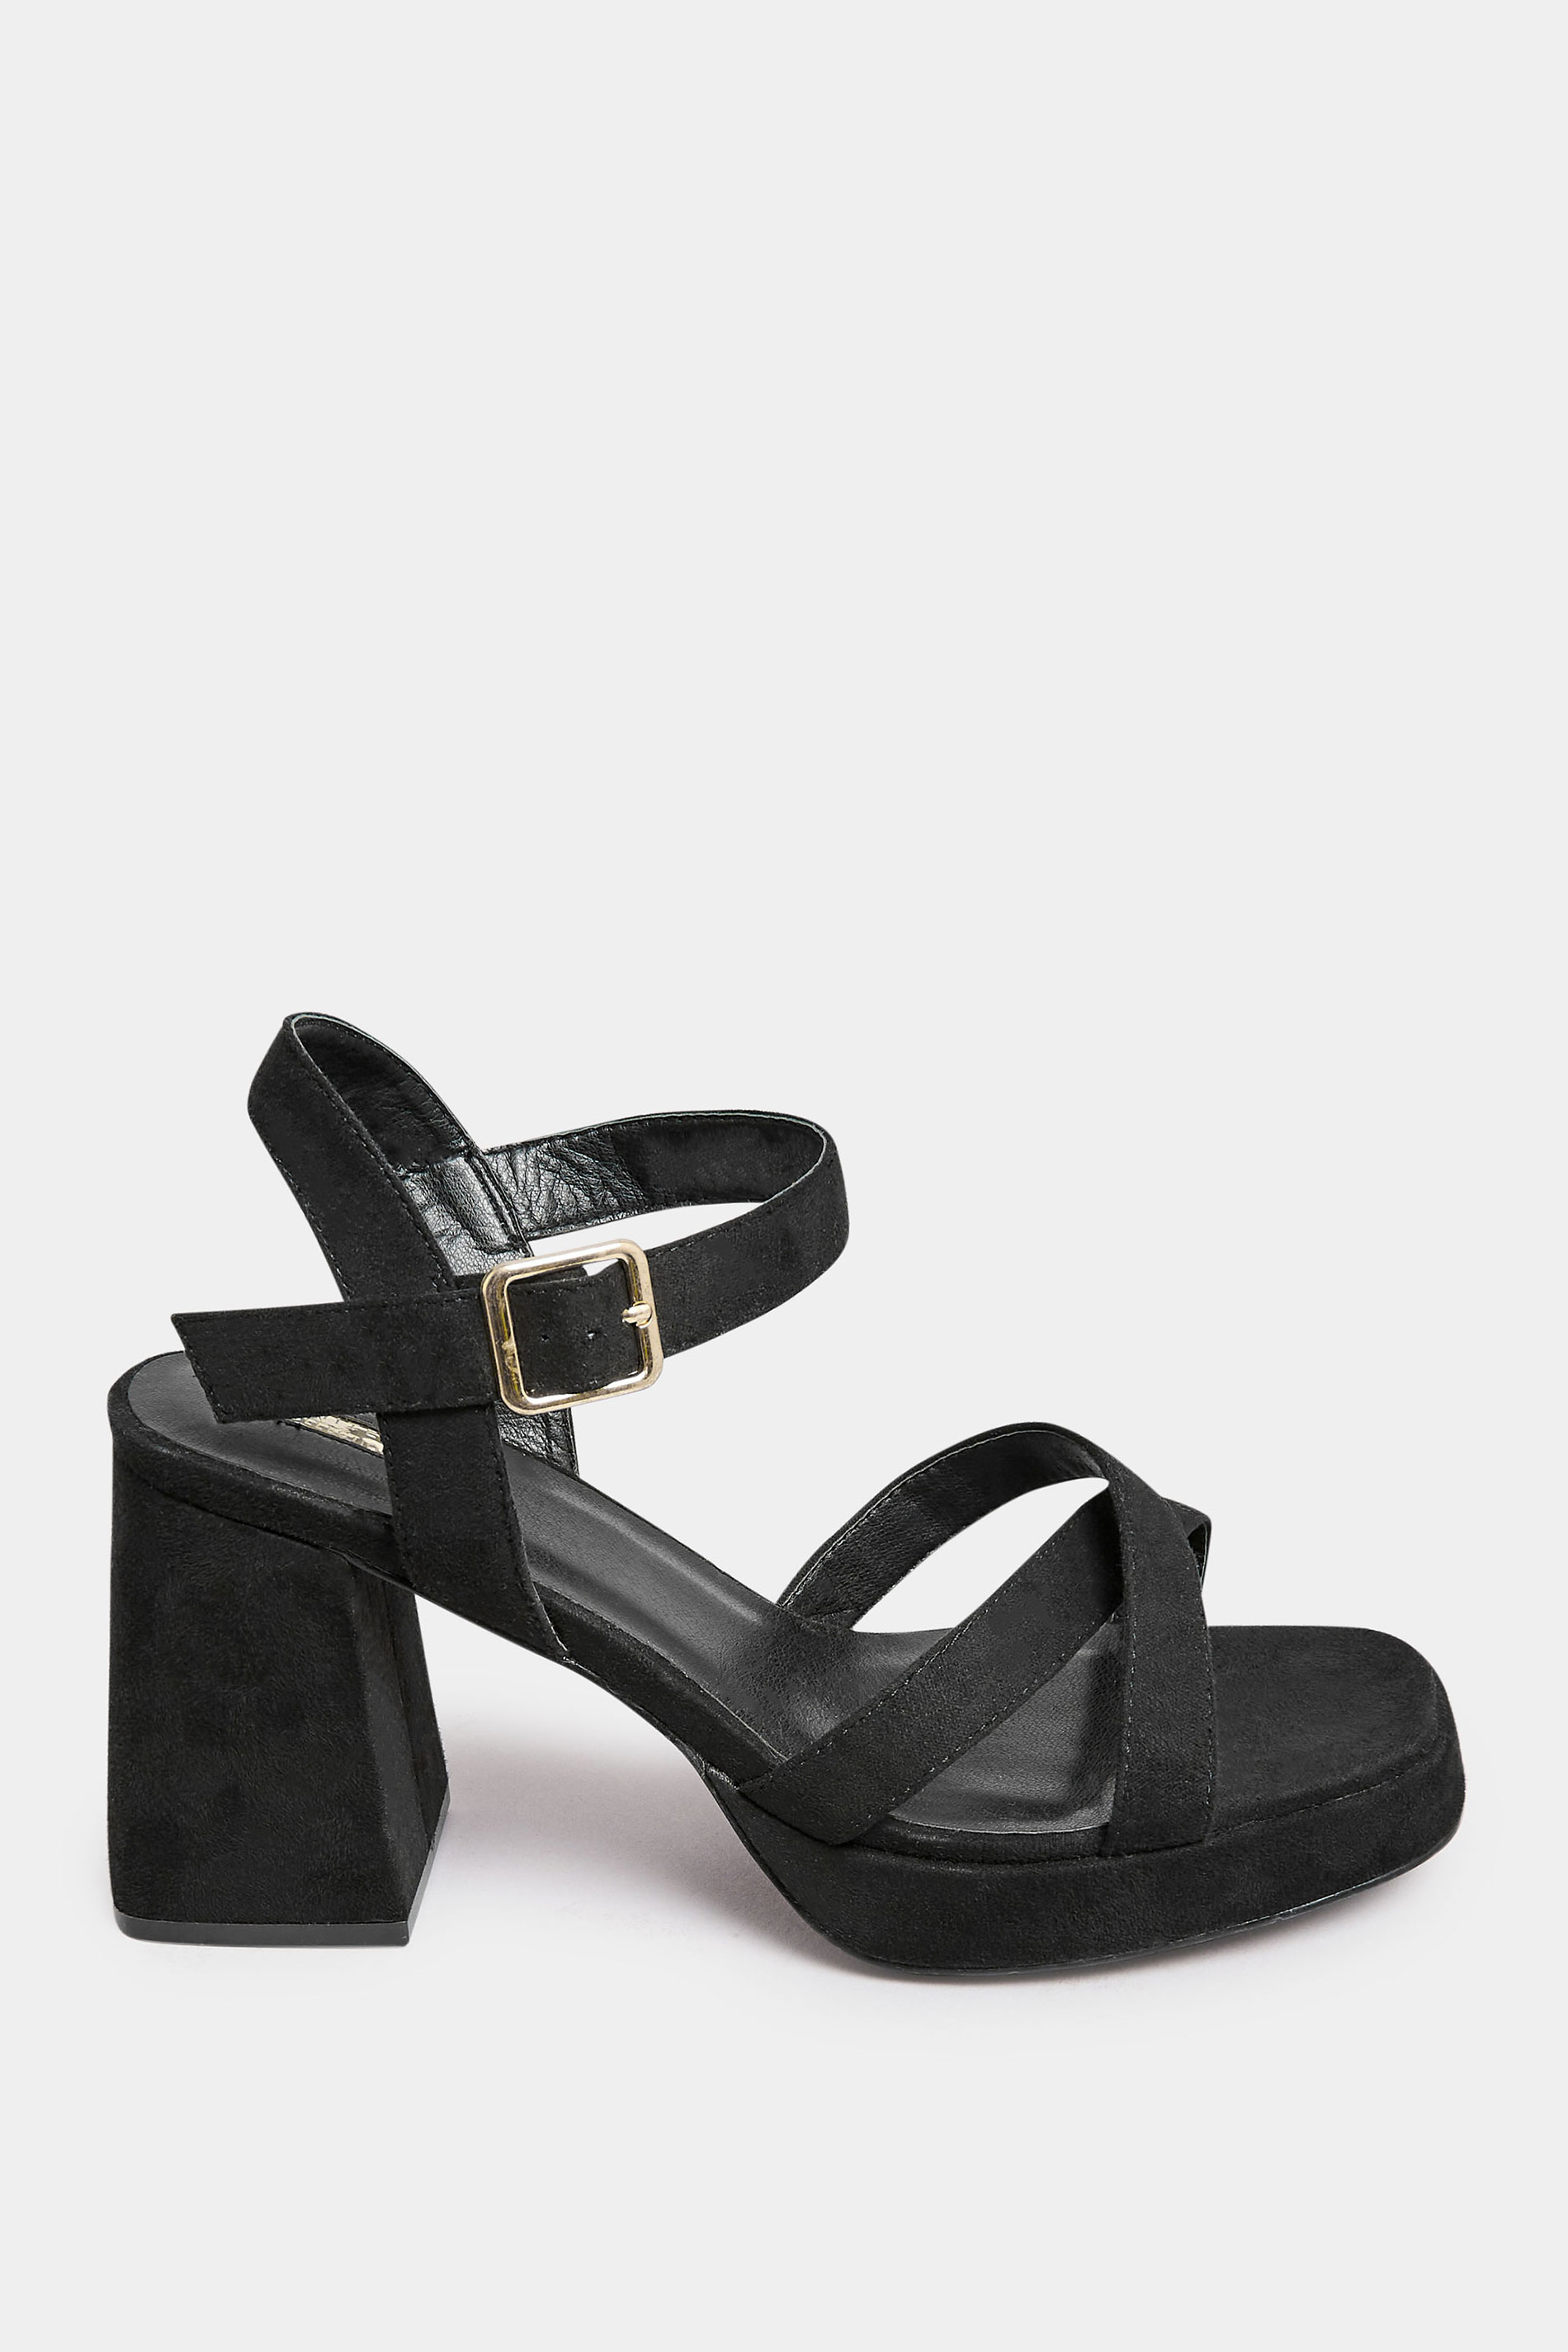 Black Platform Sandal Heels In Wide E Fit & Extra Wide EEE Fit | Yours Clothing  3